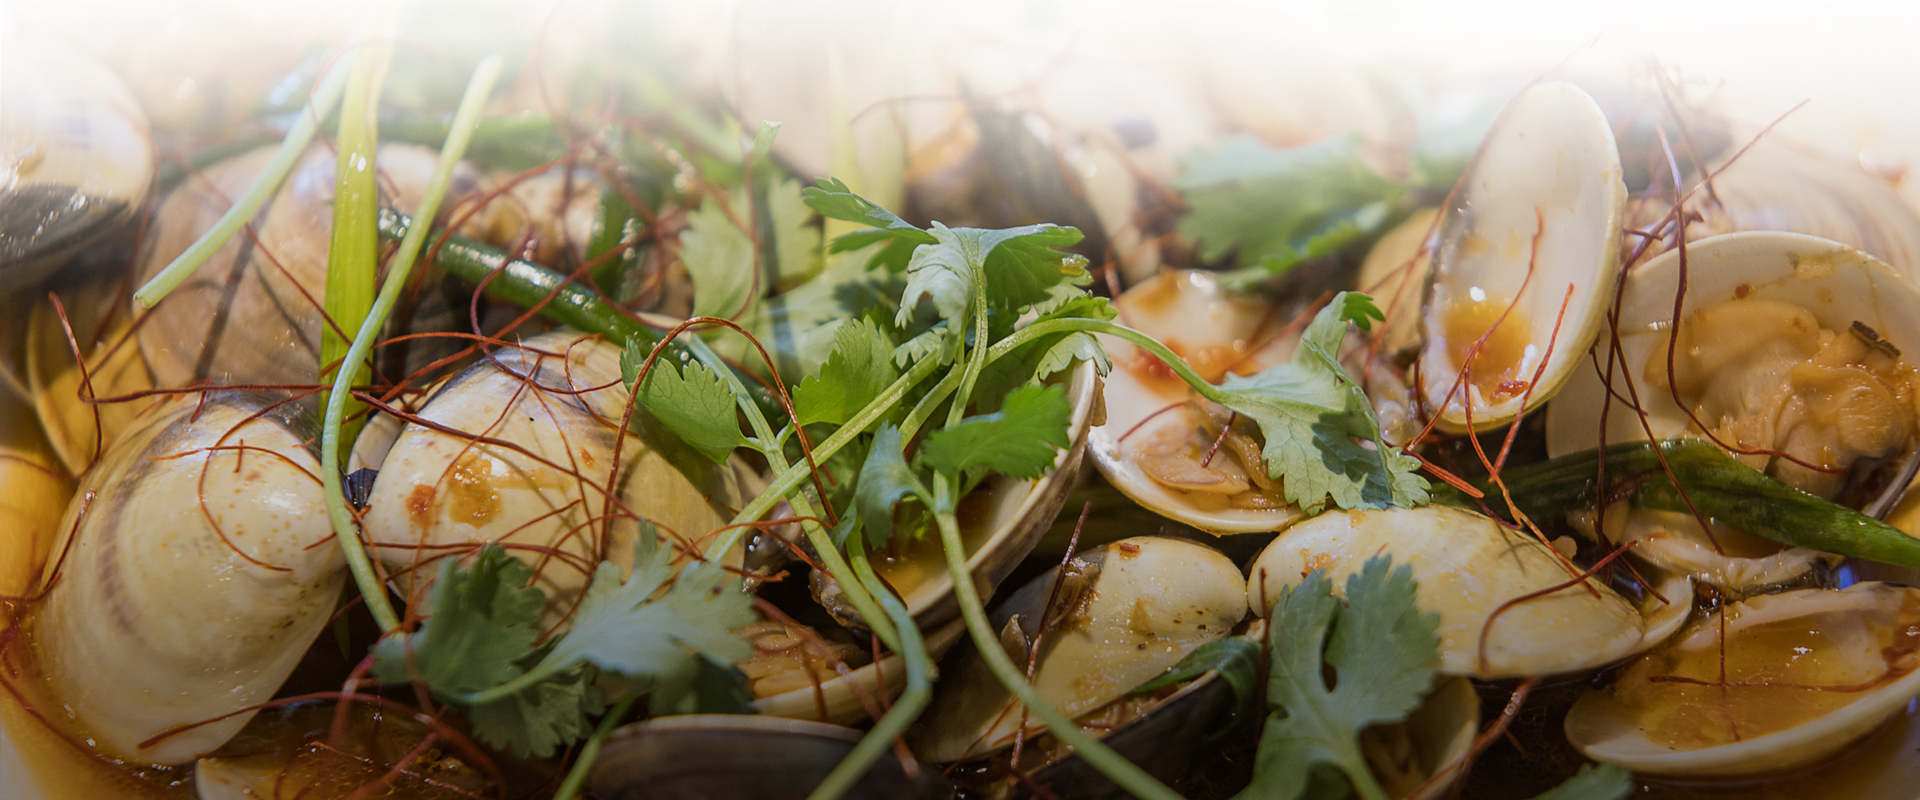 Steamed clams plated with fresh herbs 